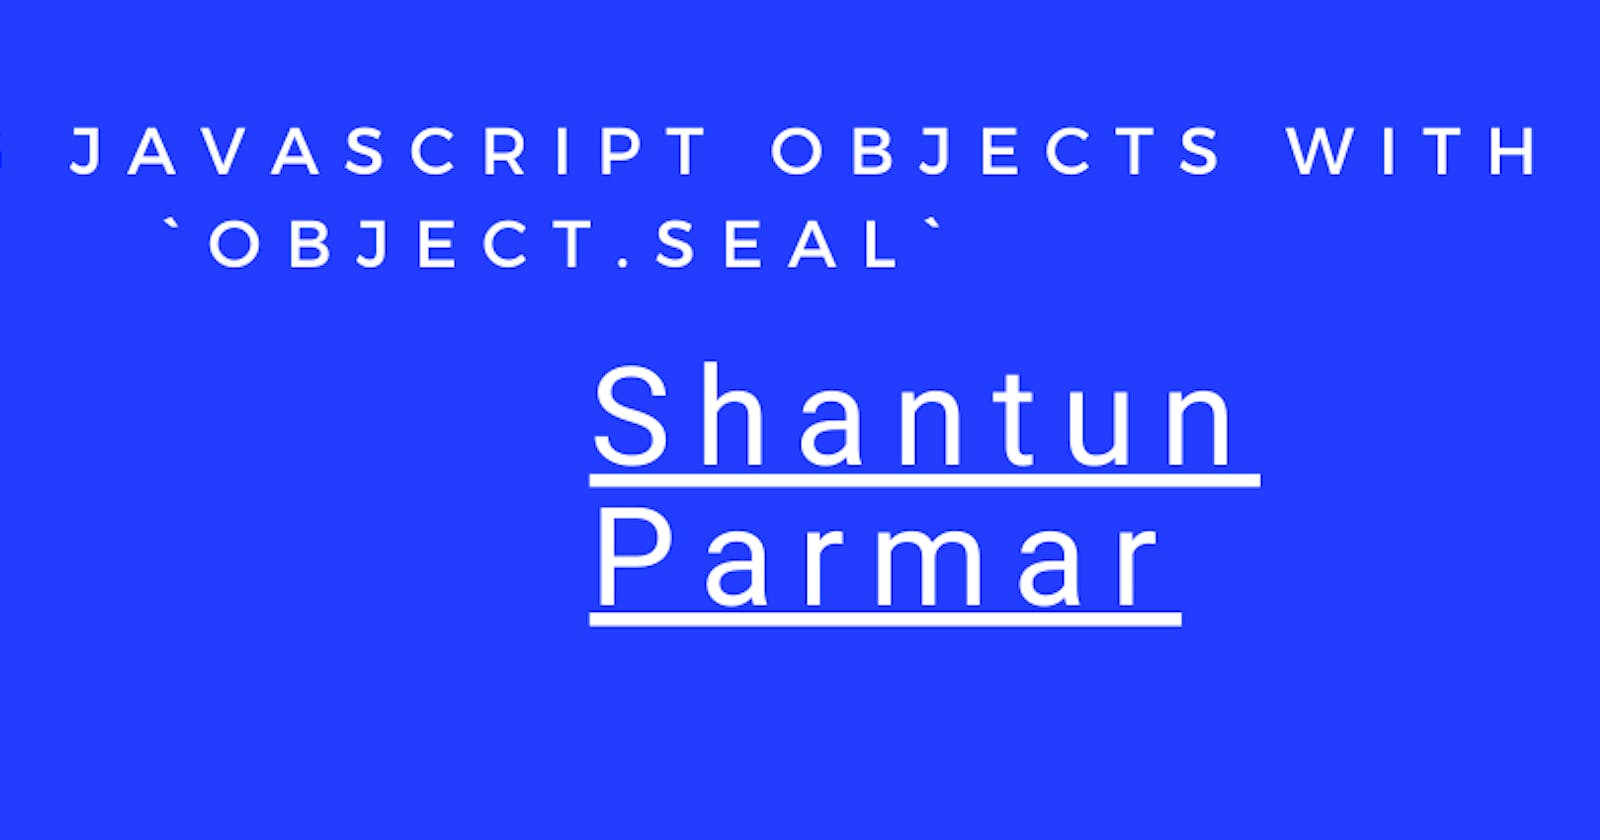 Sealing JavaScript Objects with `Object.seal`